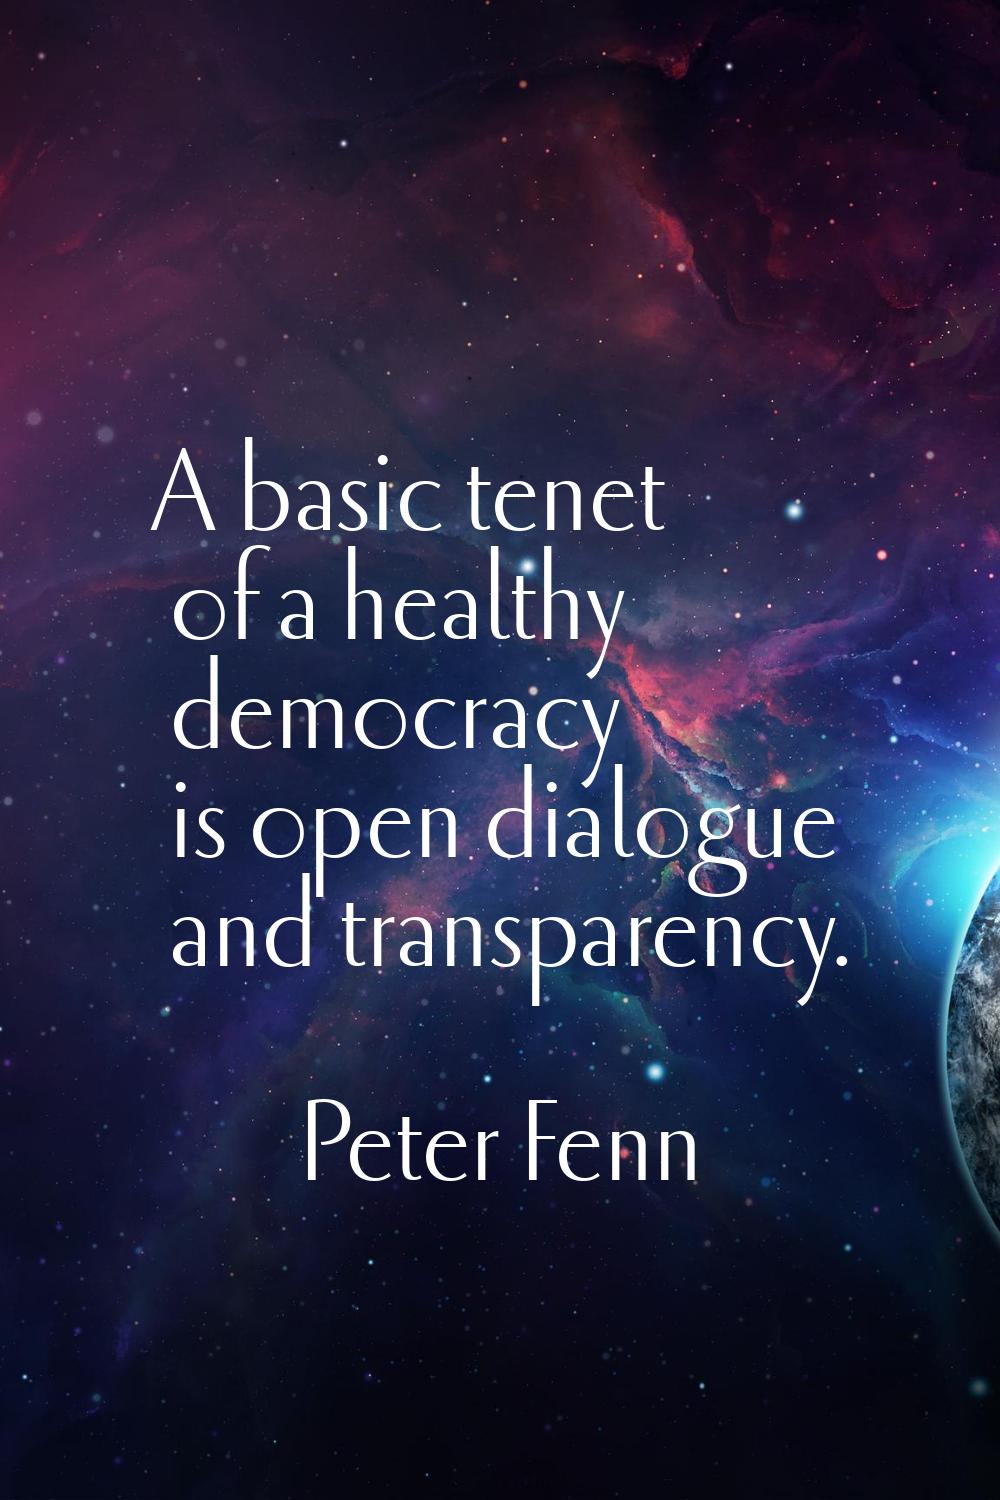 A basic tenet of a healthy democracy is open dialogue and transparency.